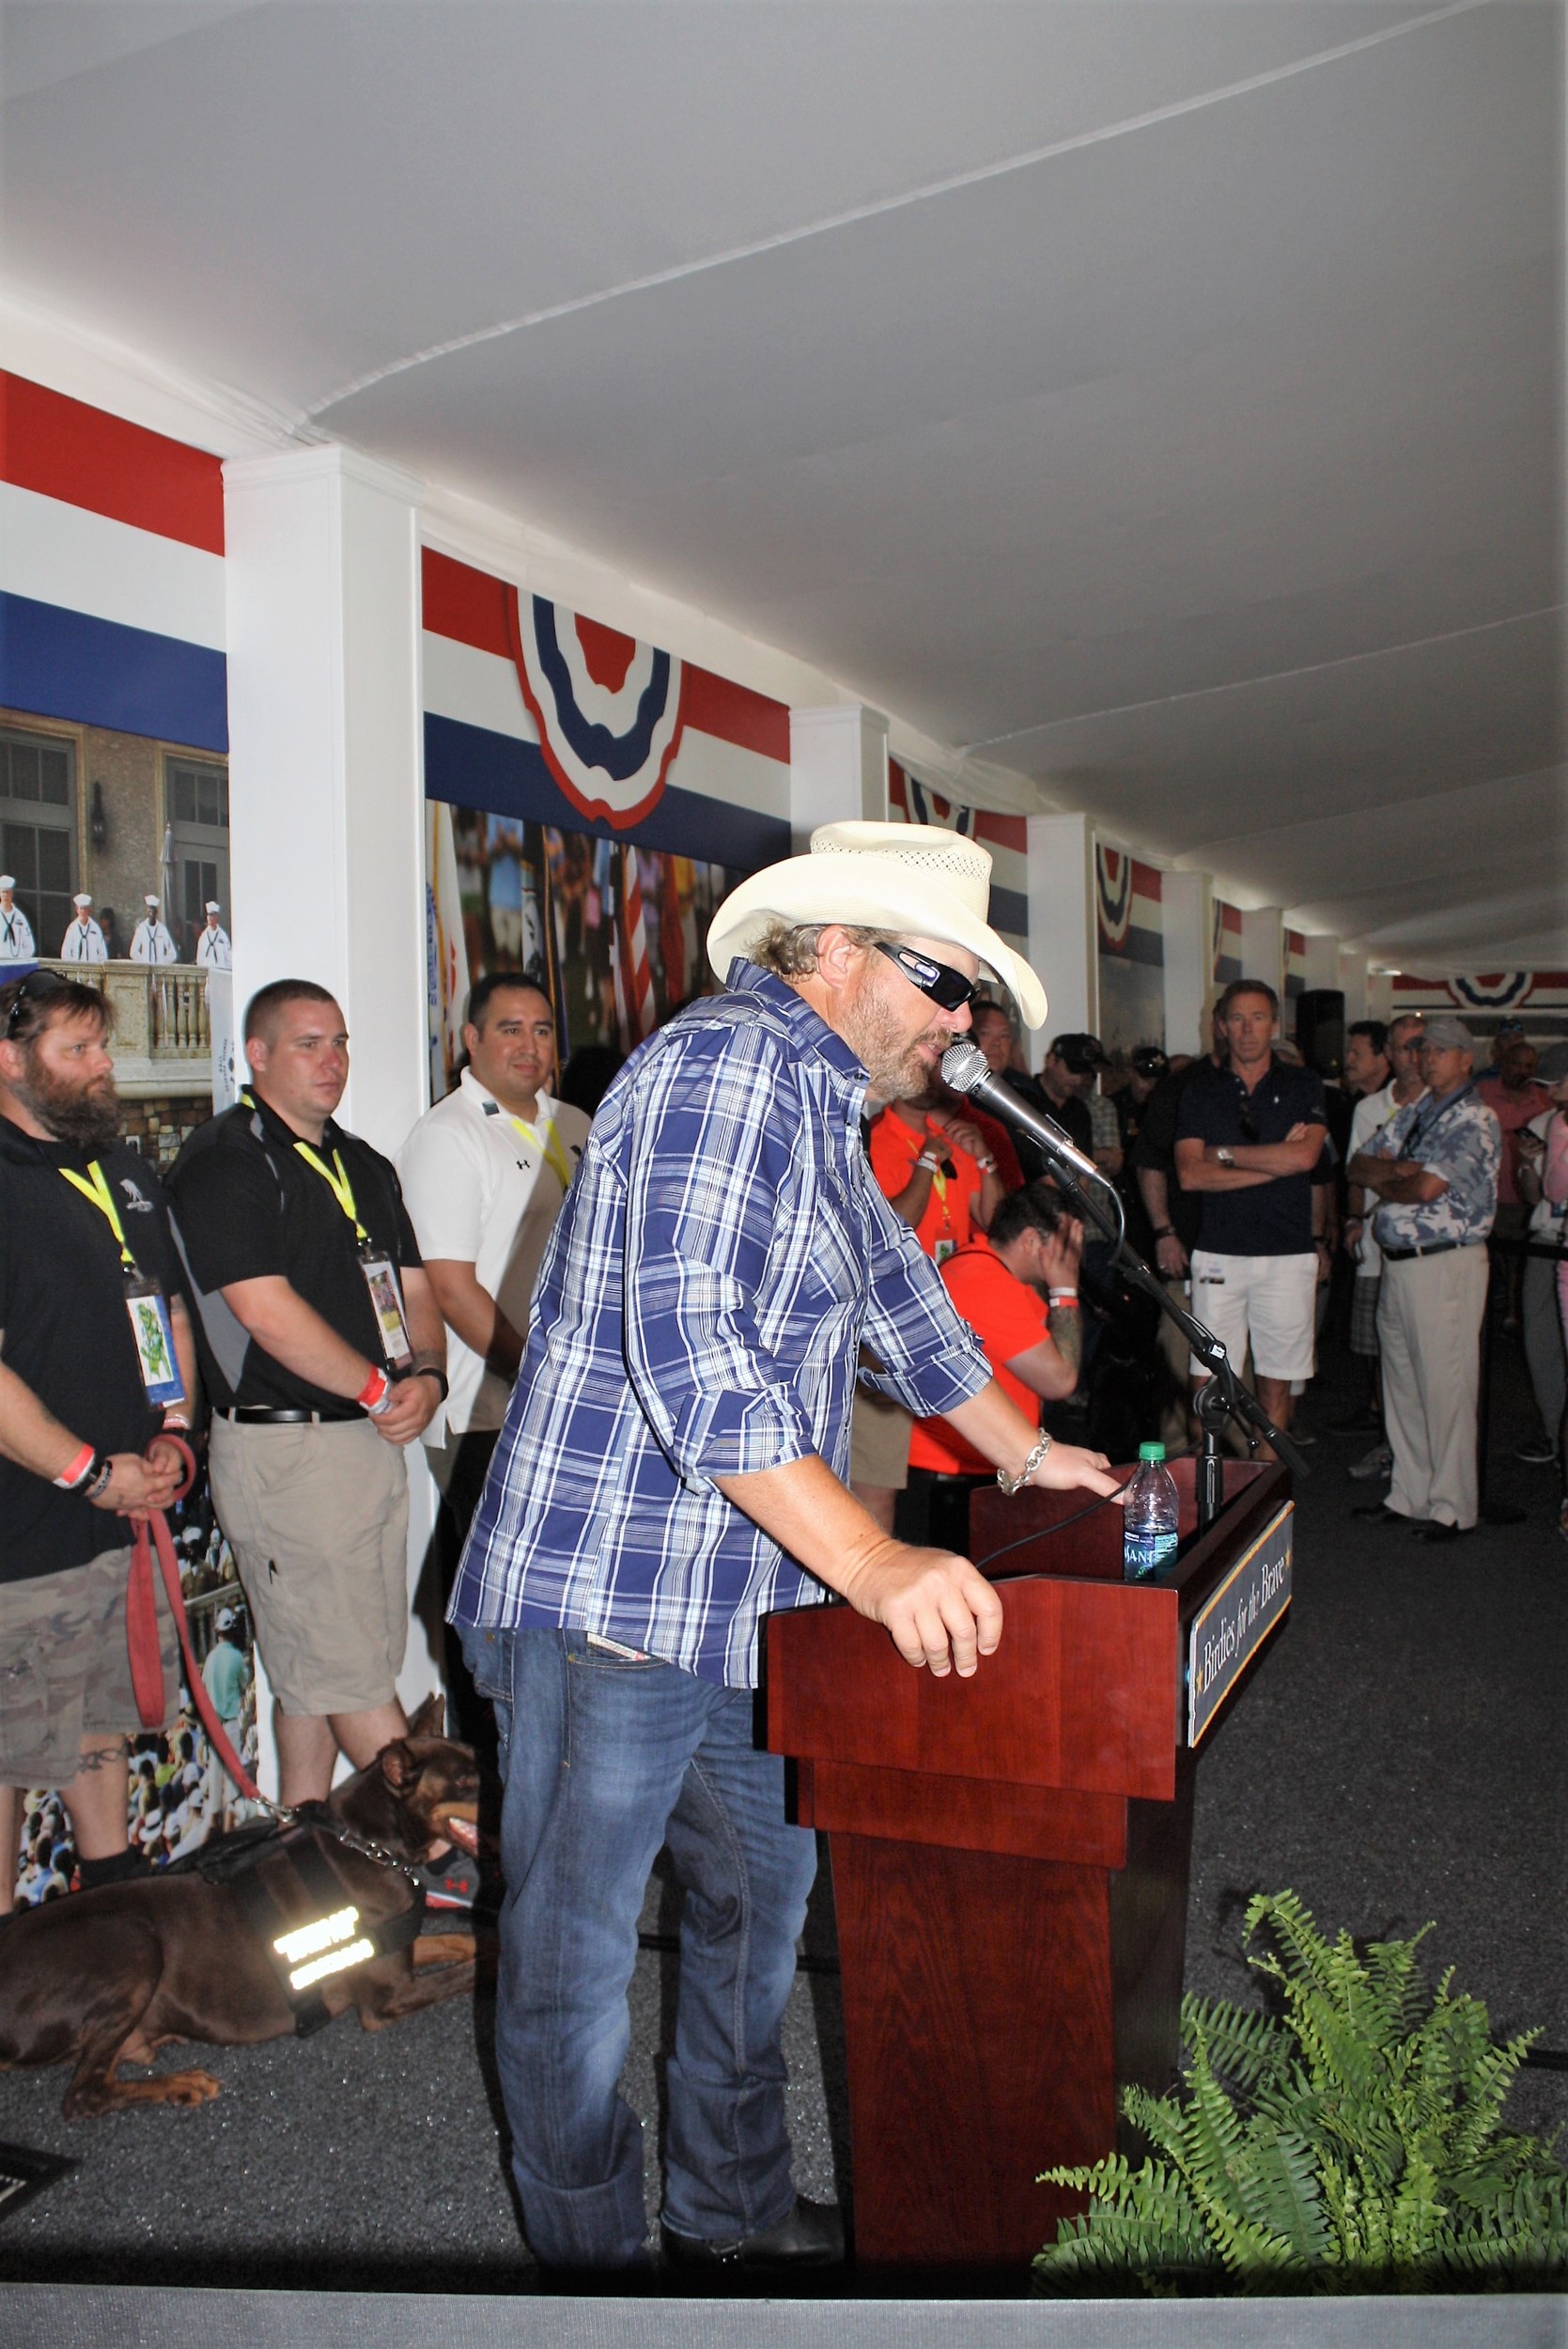 Country Music Star Toby Keith addresses guests at the Birdies for the Brave Patriots’ Outpost as representatives from K9s for Warriors look on